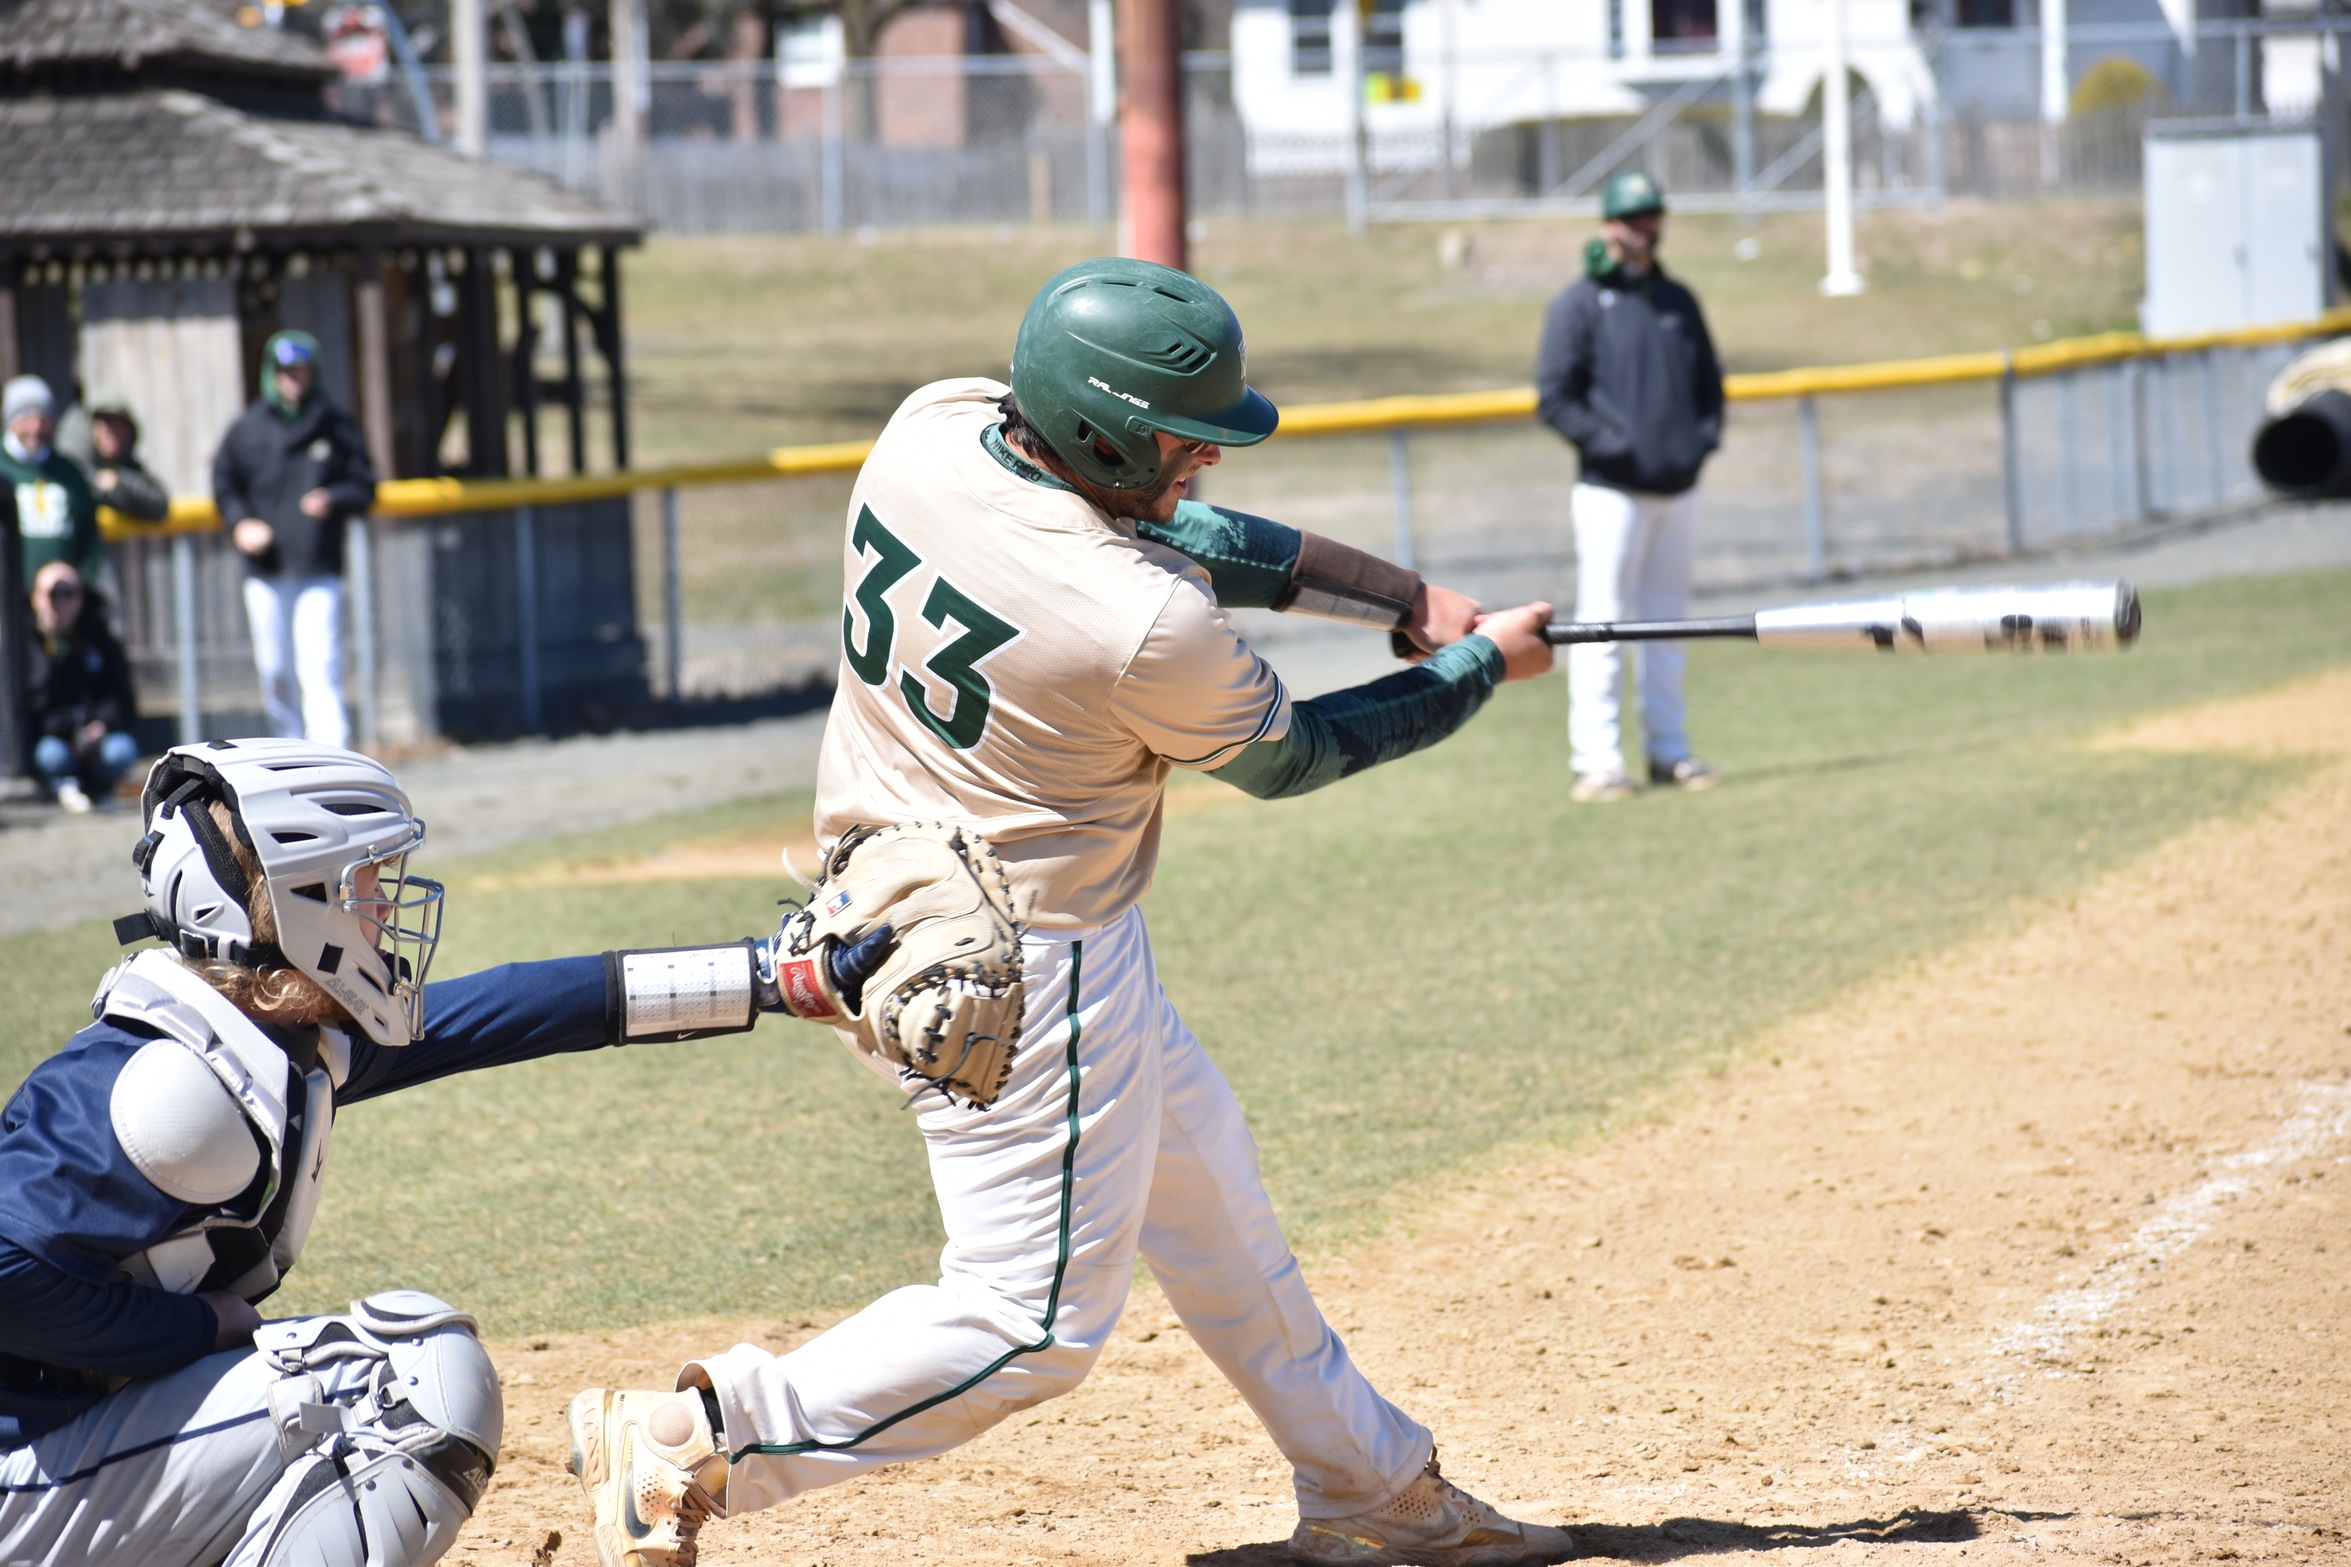 Galenski Records 4 Hits in Loss Against Bears